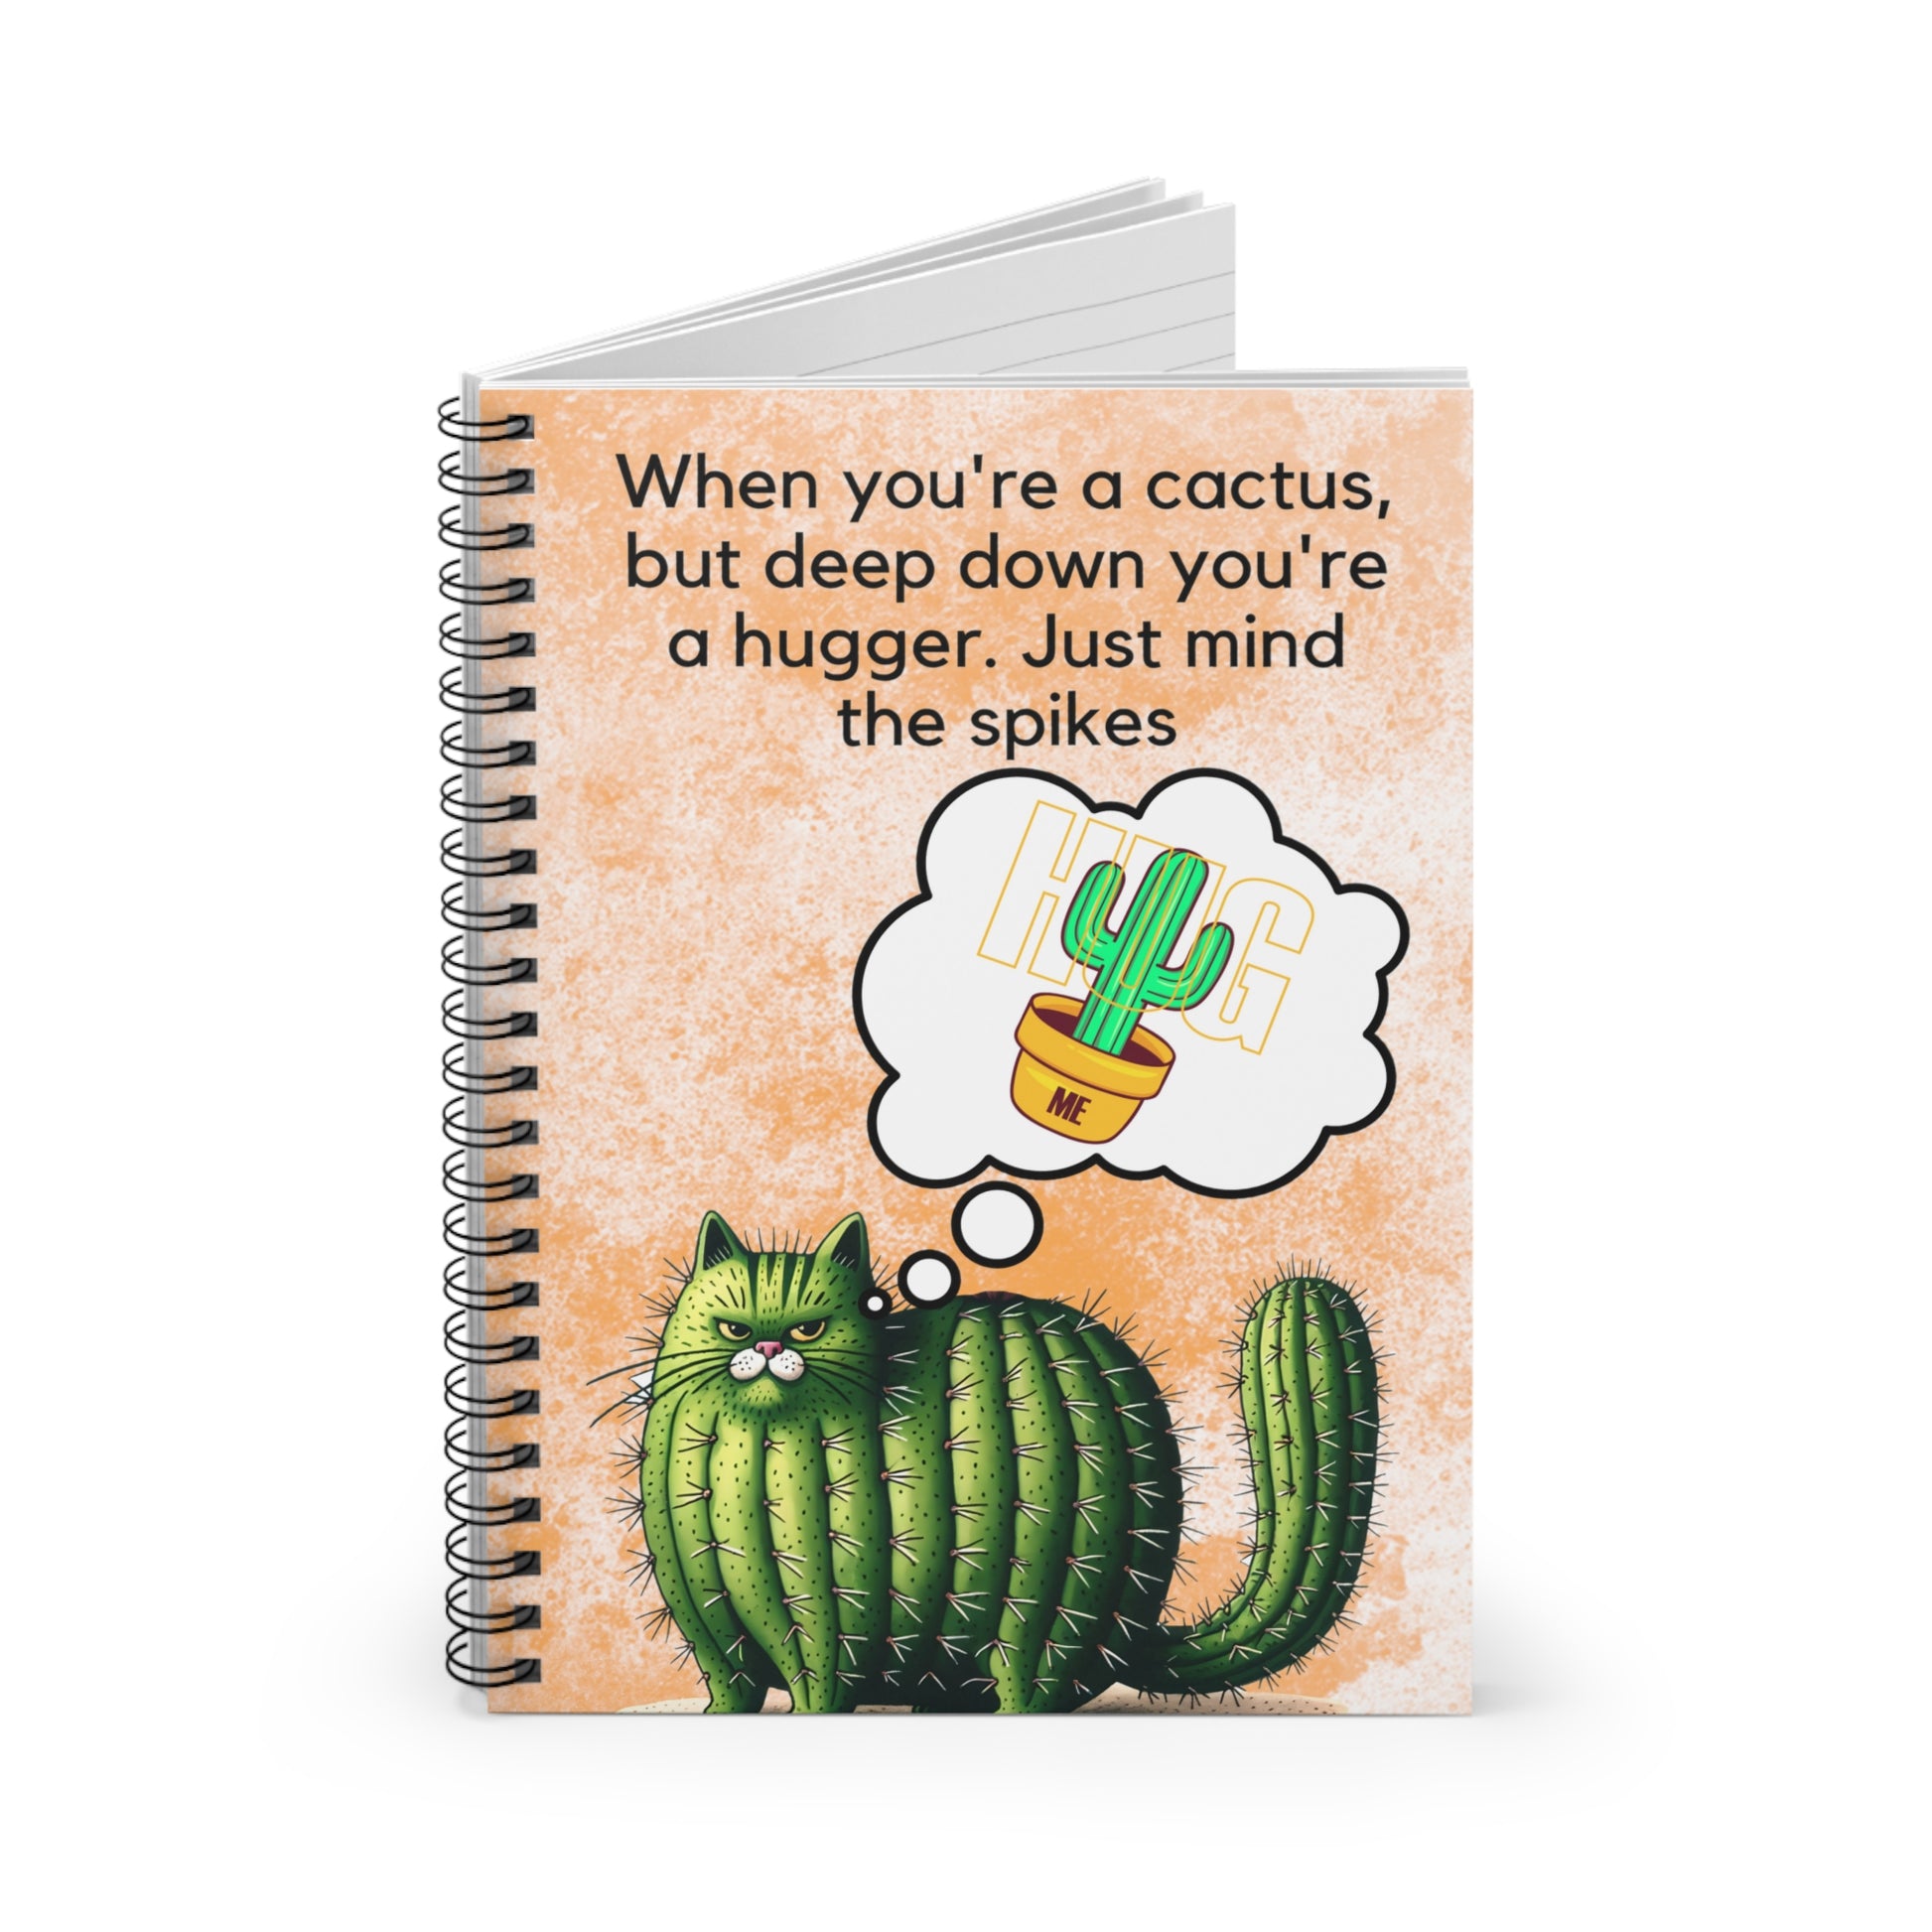 Hug Me: Spiral Notebook - Log Books - Journals - Diaries - and More Custom Printed by TheGlassyLass